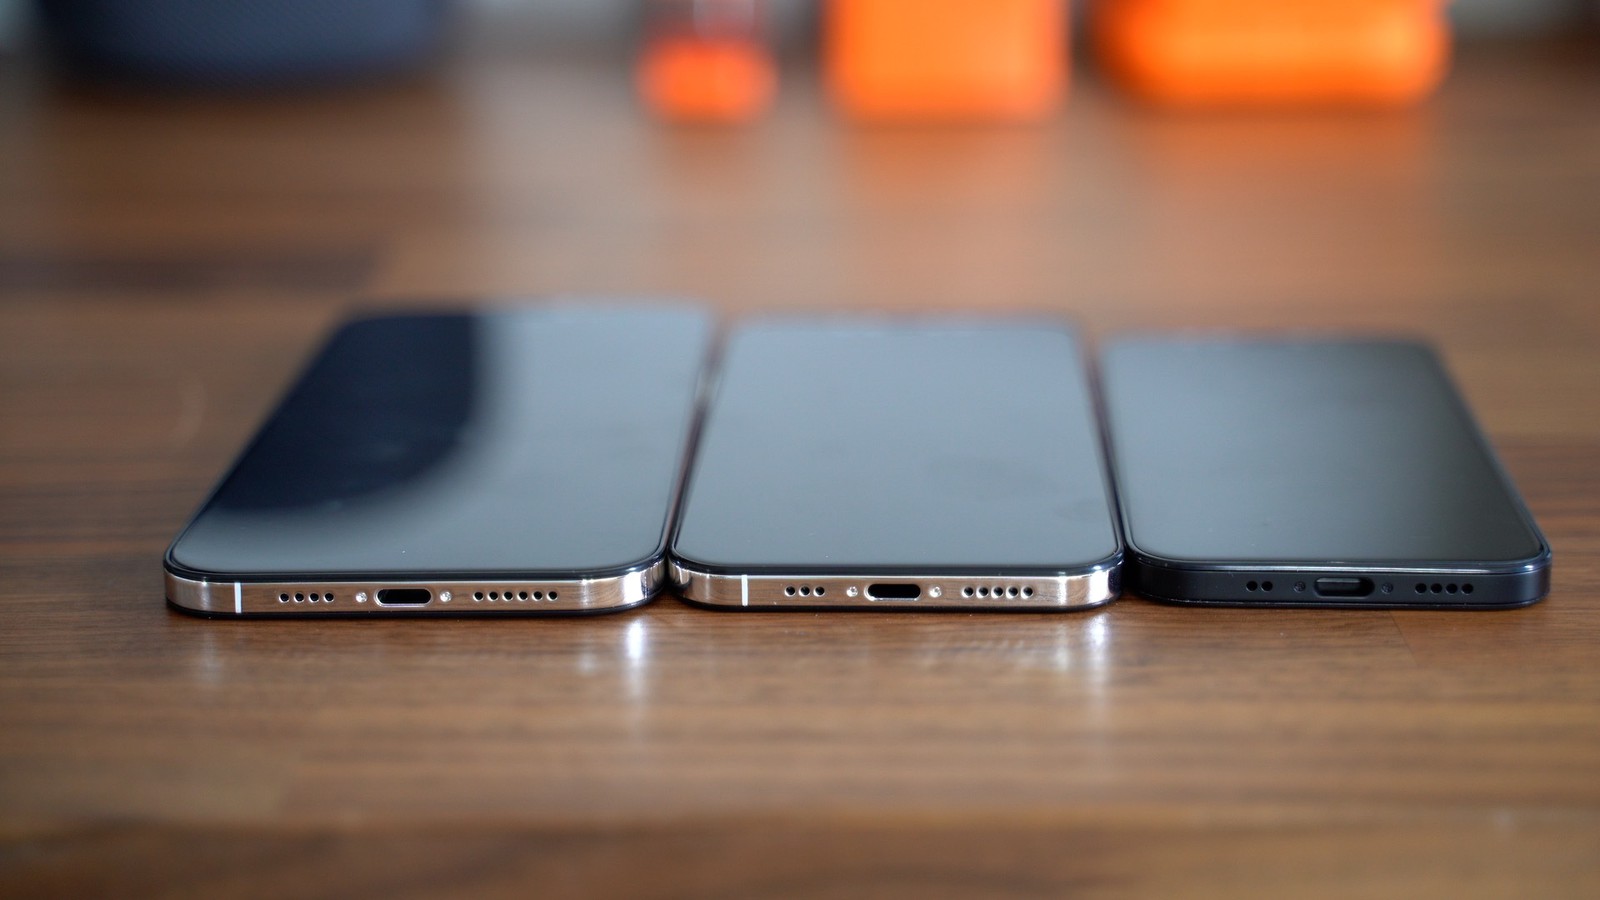 New Iphone 12 Dummies Show Off Squared Body Size Comparison